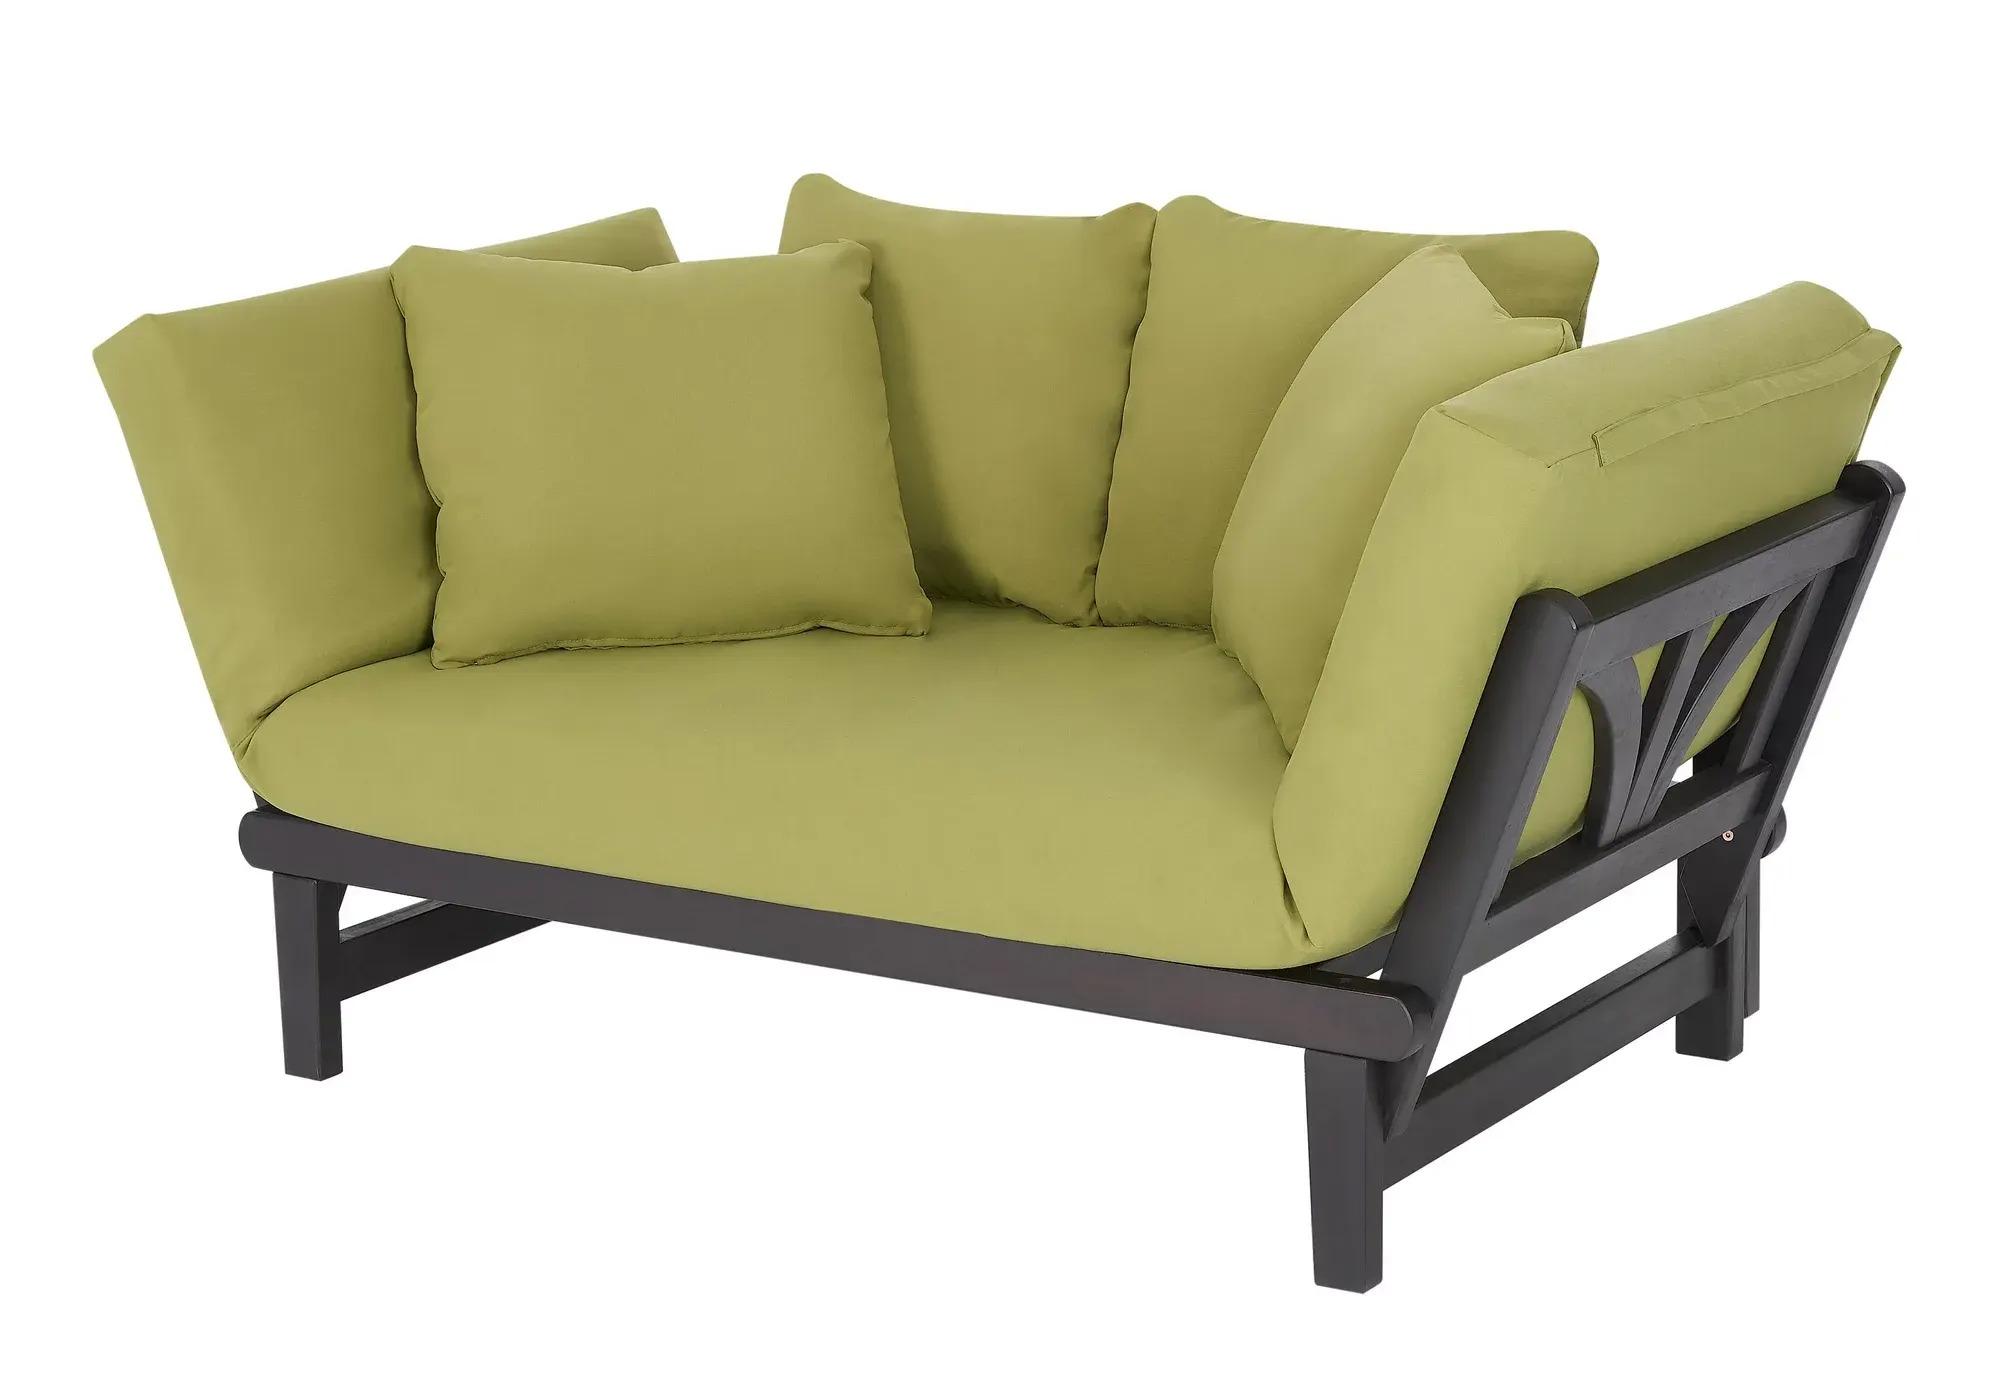 Better Homes and Gardens Delahey Wood Outdoor Daybed Sofa for $236.97 Shipped